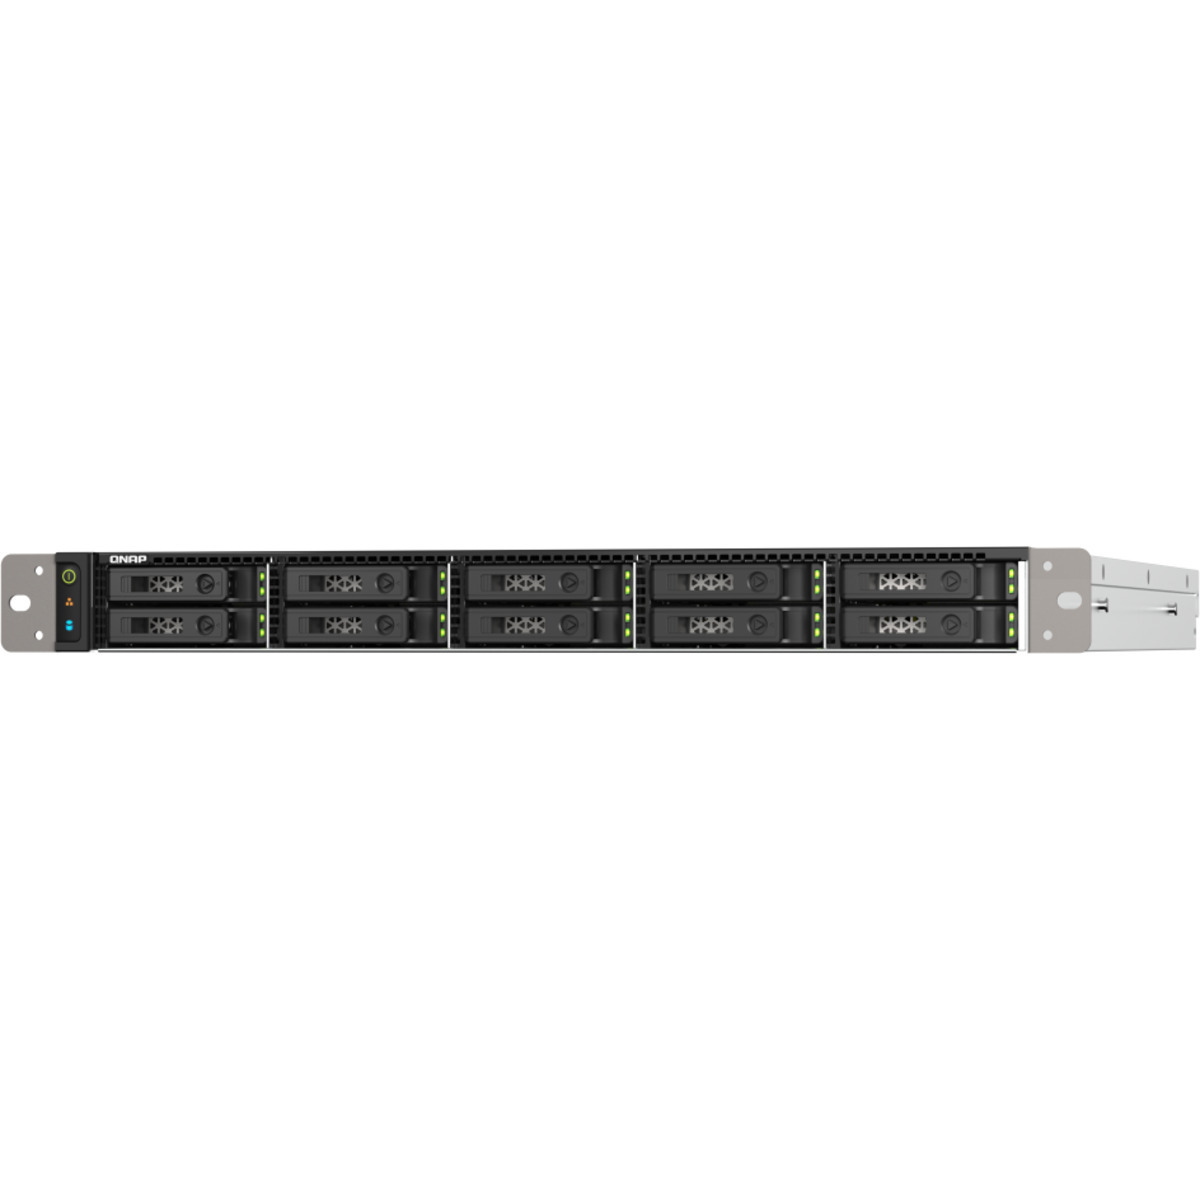 buy QNAP TS-h1090FU-7302P 10tb RackMount NAS - Network Attached Storage Device 10x1000gb Samsung 870 EVO MZ-77E1T0BAM 2.5 560/530MB/s SATA 6Gb/s SSD CONSUMER Class Drives Installed - Burn-In Tested - nas headquarters buy network attached storage server device das new raid-5 free shipping simply usa TS-h1090FU-7302P